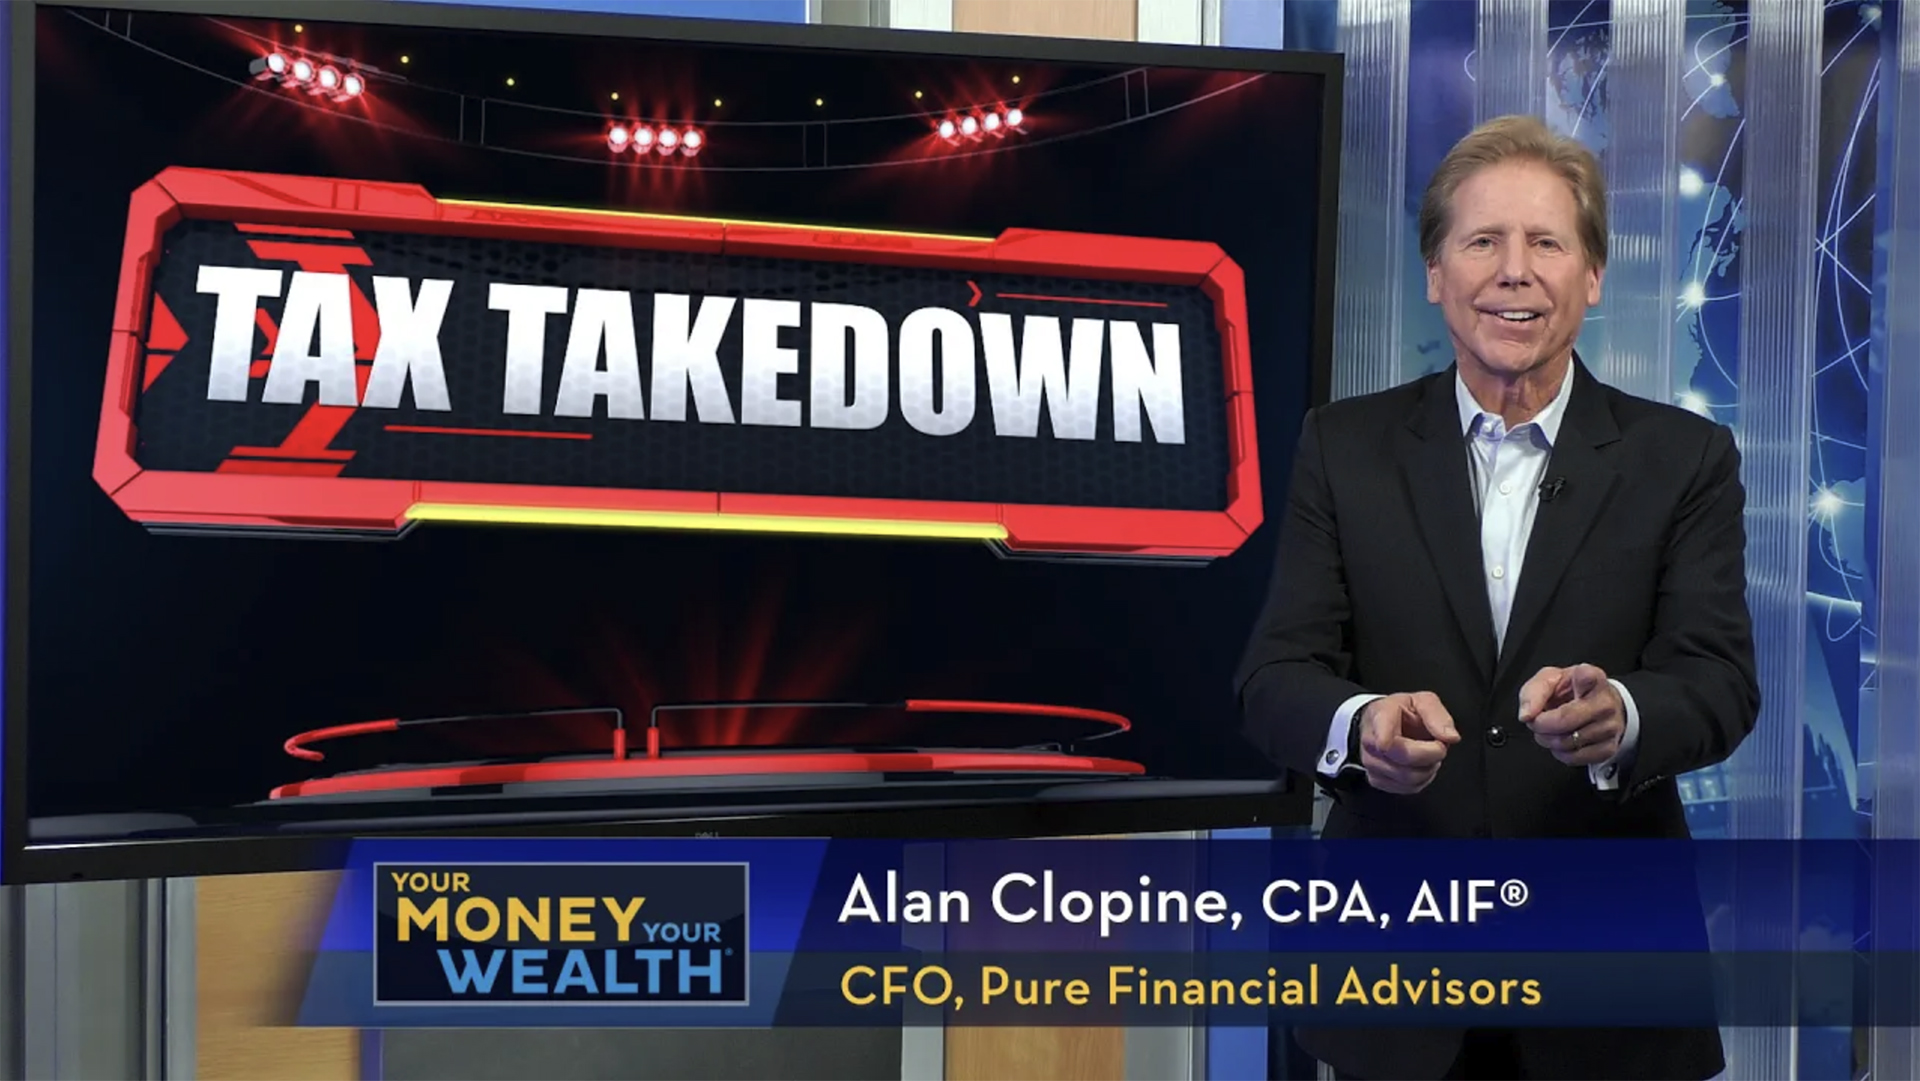 Tax Takedown - Your Money, Your Wealth® TV - S9 | E2